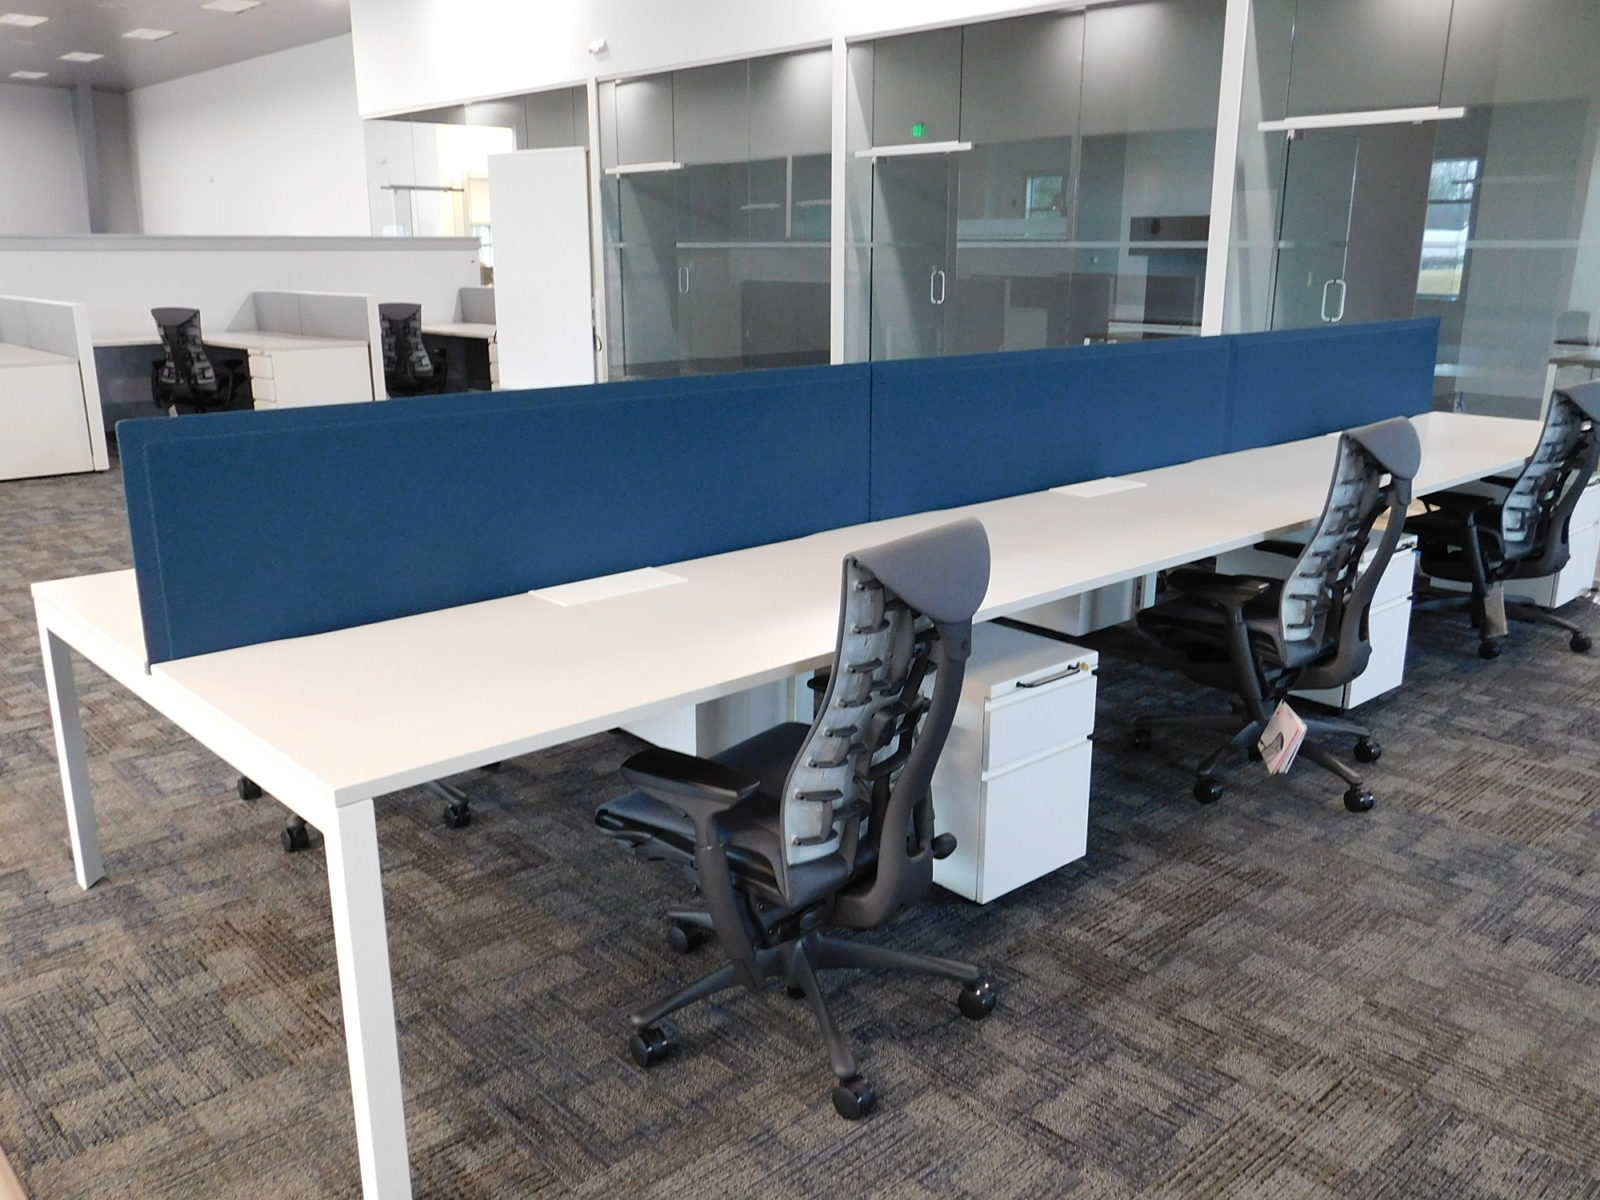 Herman Miller benching stations with blue fabric screen down center, grey Embody chairs